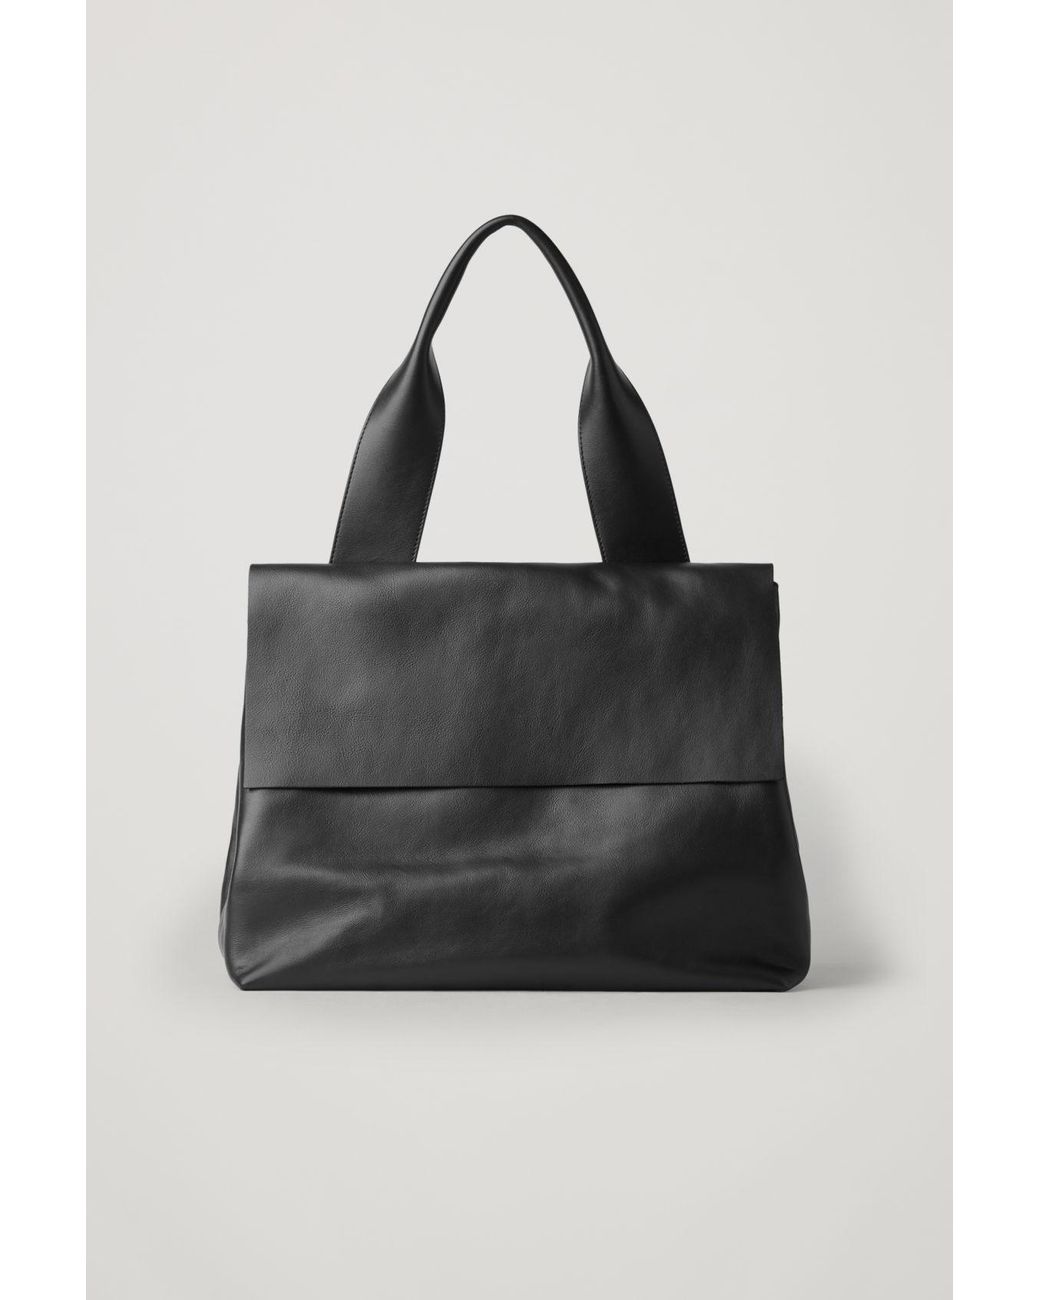 COS Leather Tote Bag With Strap in Black | Lyst